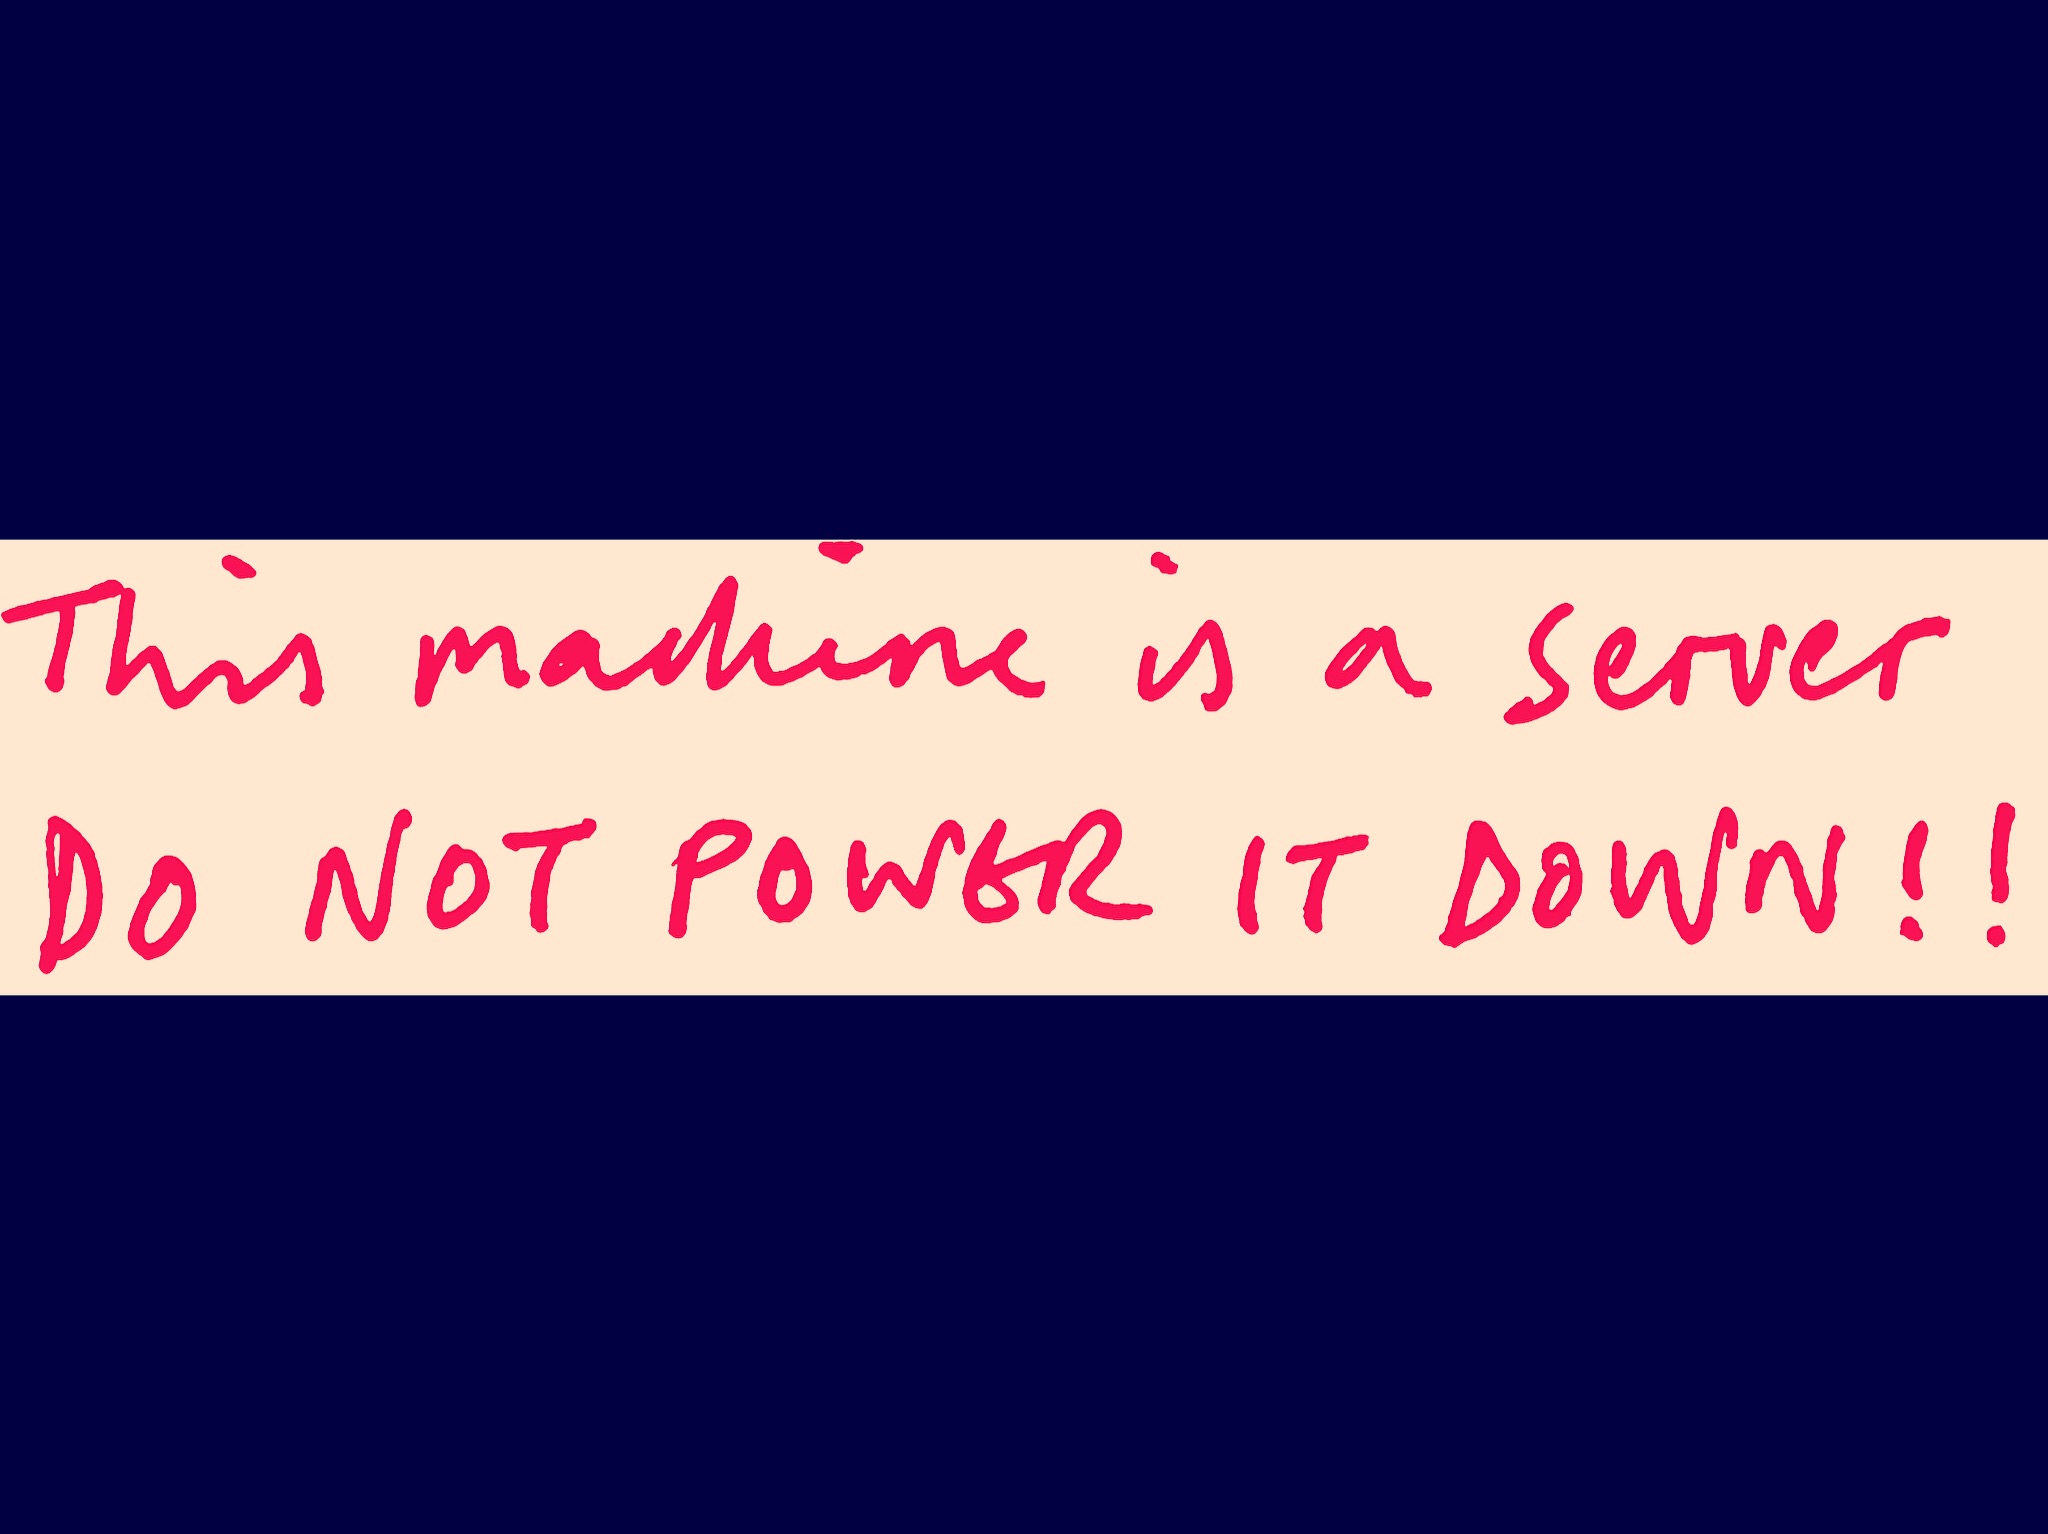 Do Not Power Down note, Keith Dodds after Tim Berners Lee